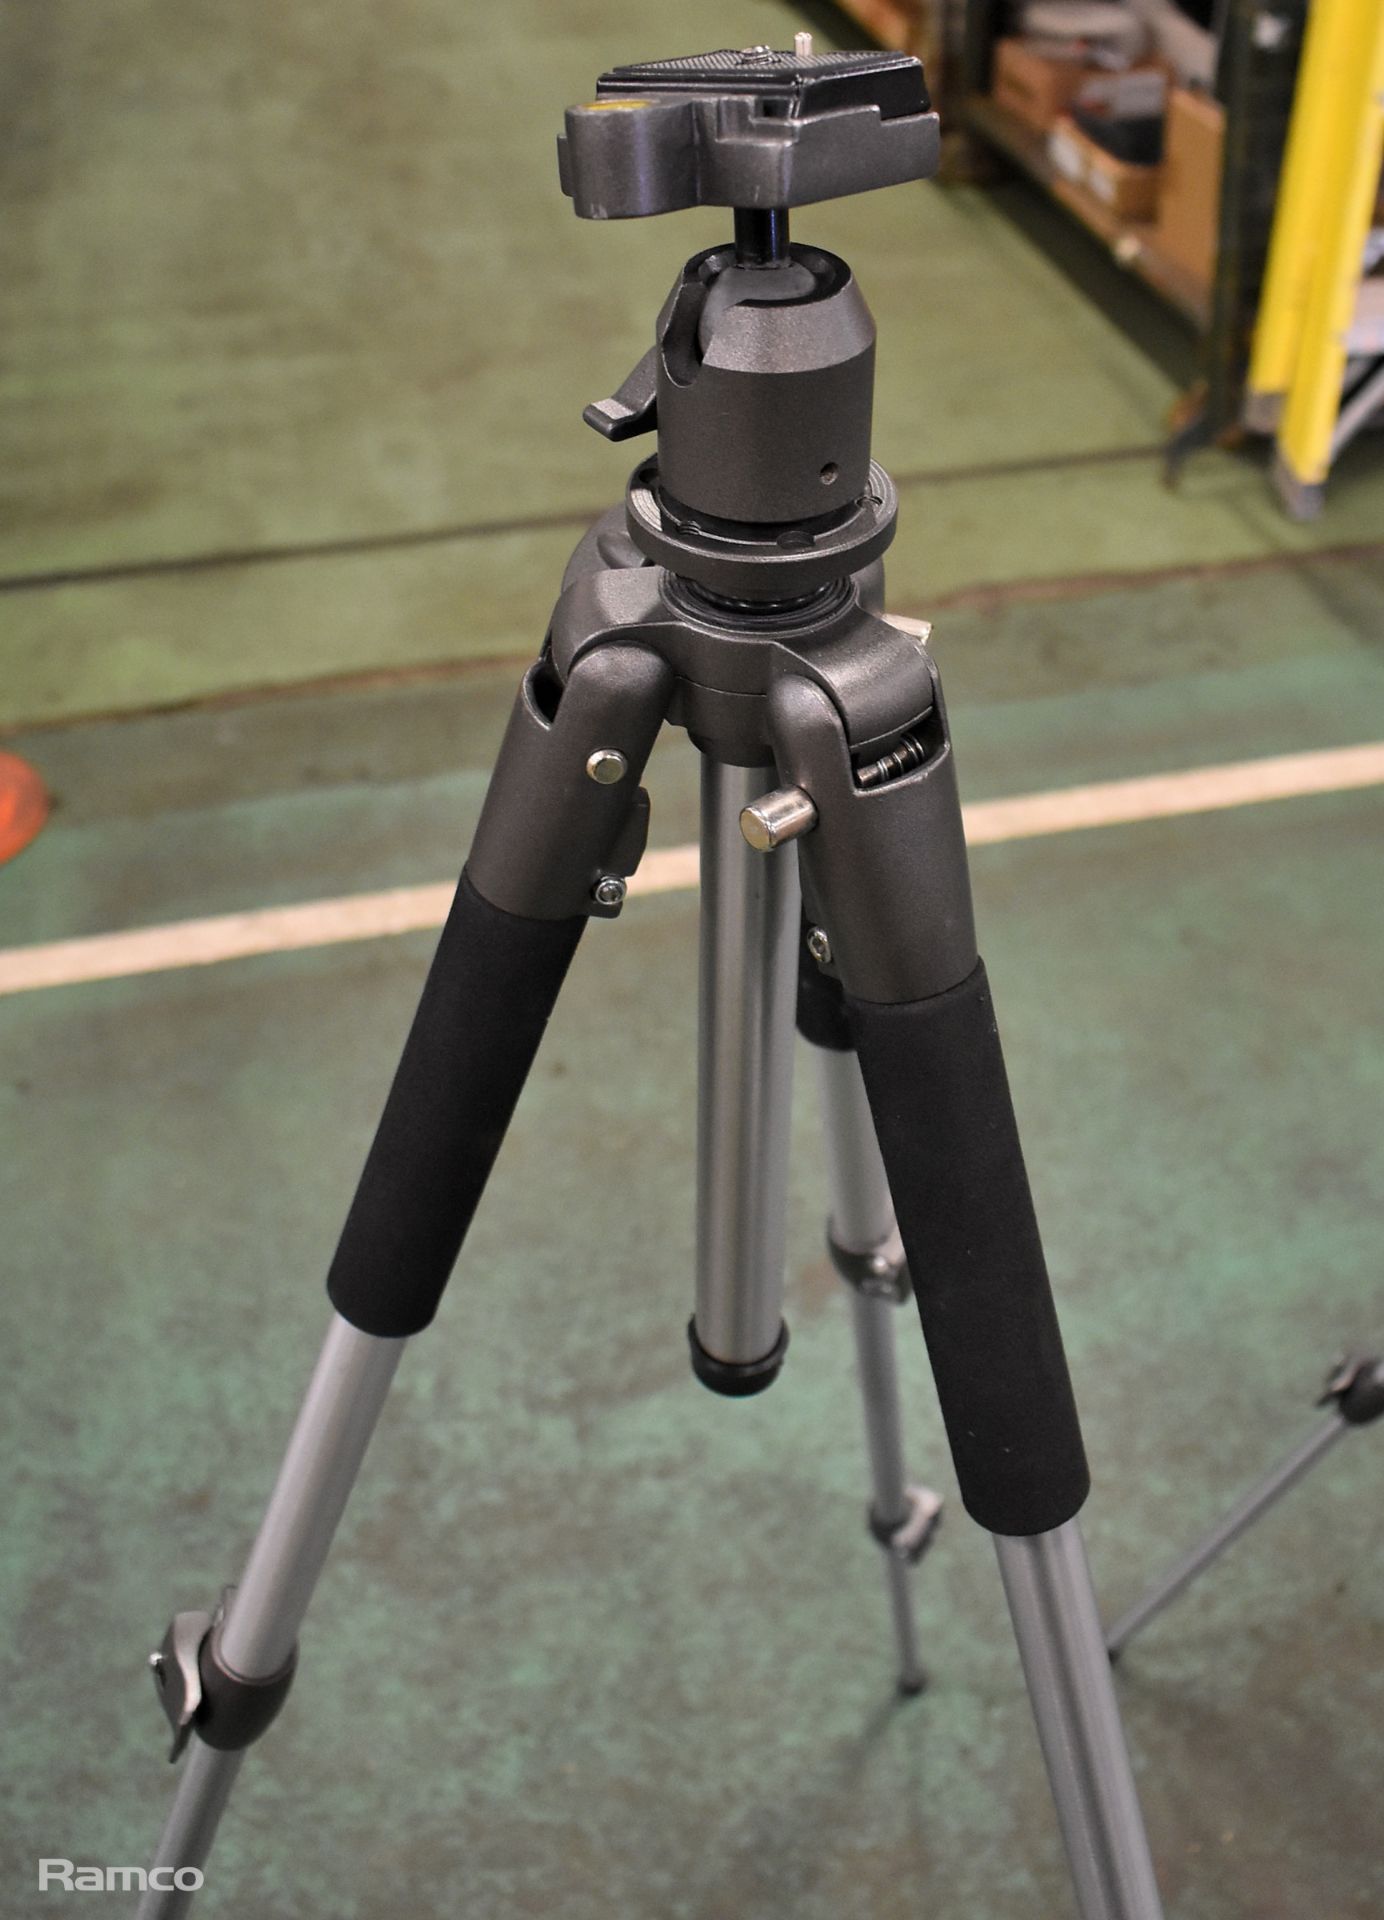 3x Bilora 1121-OK 59-143cm tripods with carry case - Image 7 of 7